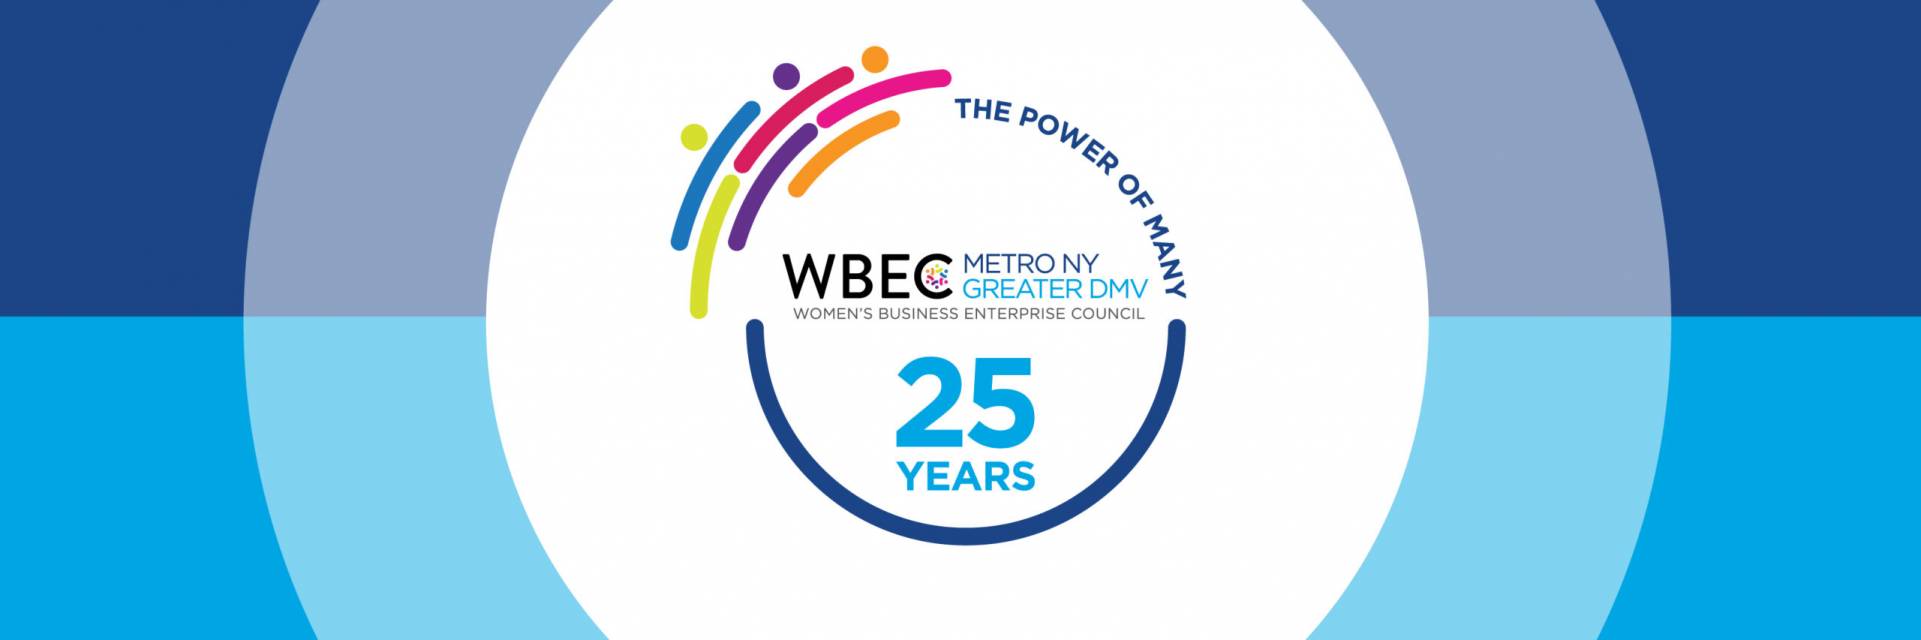 WBEC 25th Anniversary Grand Galaxy Luncheon details: September 20th, The Plaza, New York, NY